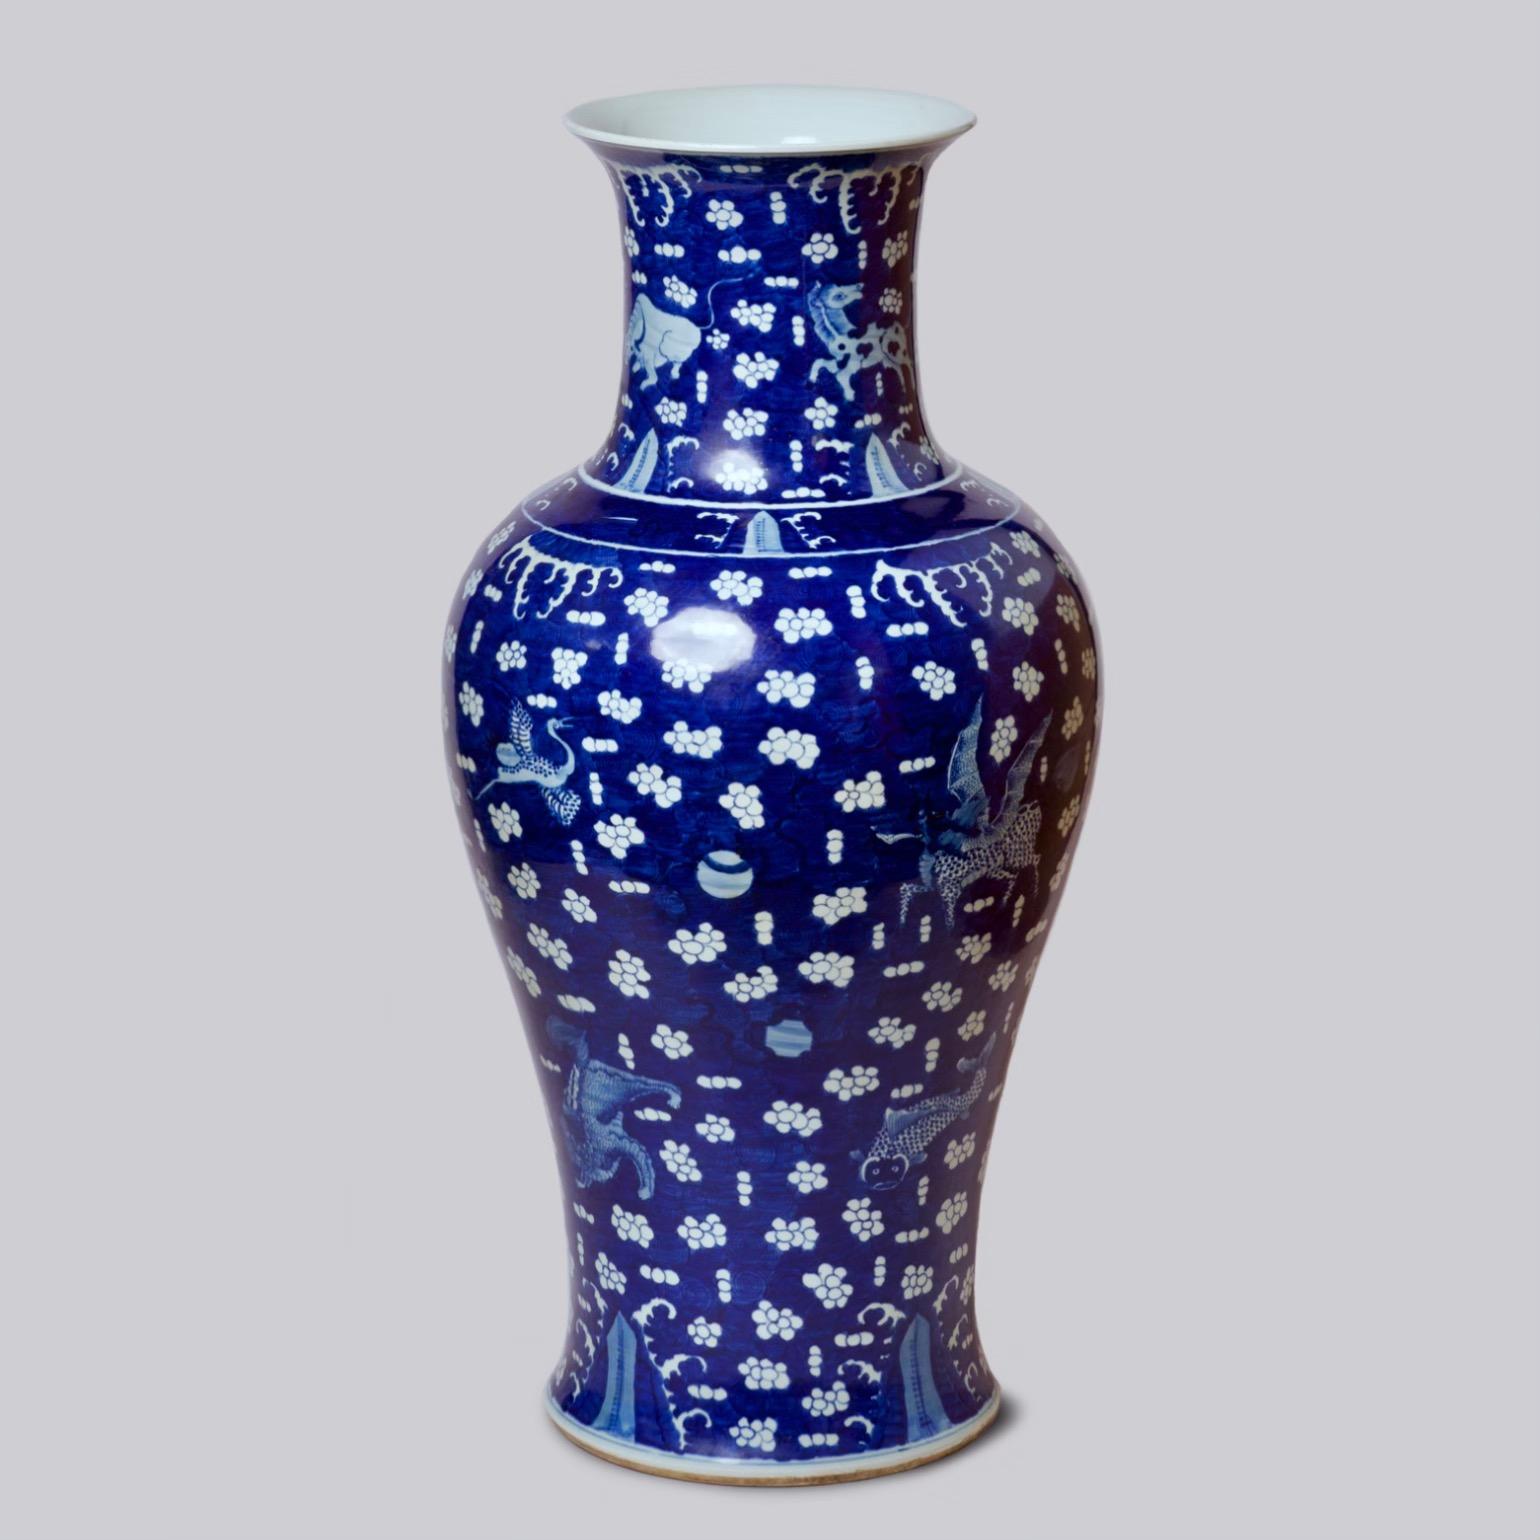 This vase is a traditional porcelain vessel from Jingdezhen, a town long distinguished by imperial patronage. An uncommon blue field with clouds and auspicious creatures set this vase apart from the blue and white we most commonly see. The names of